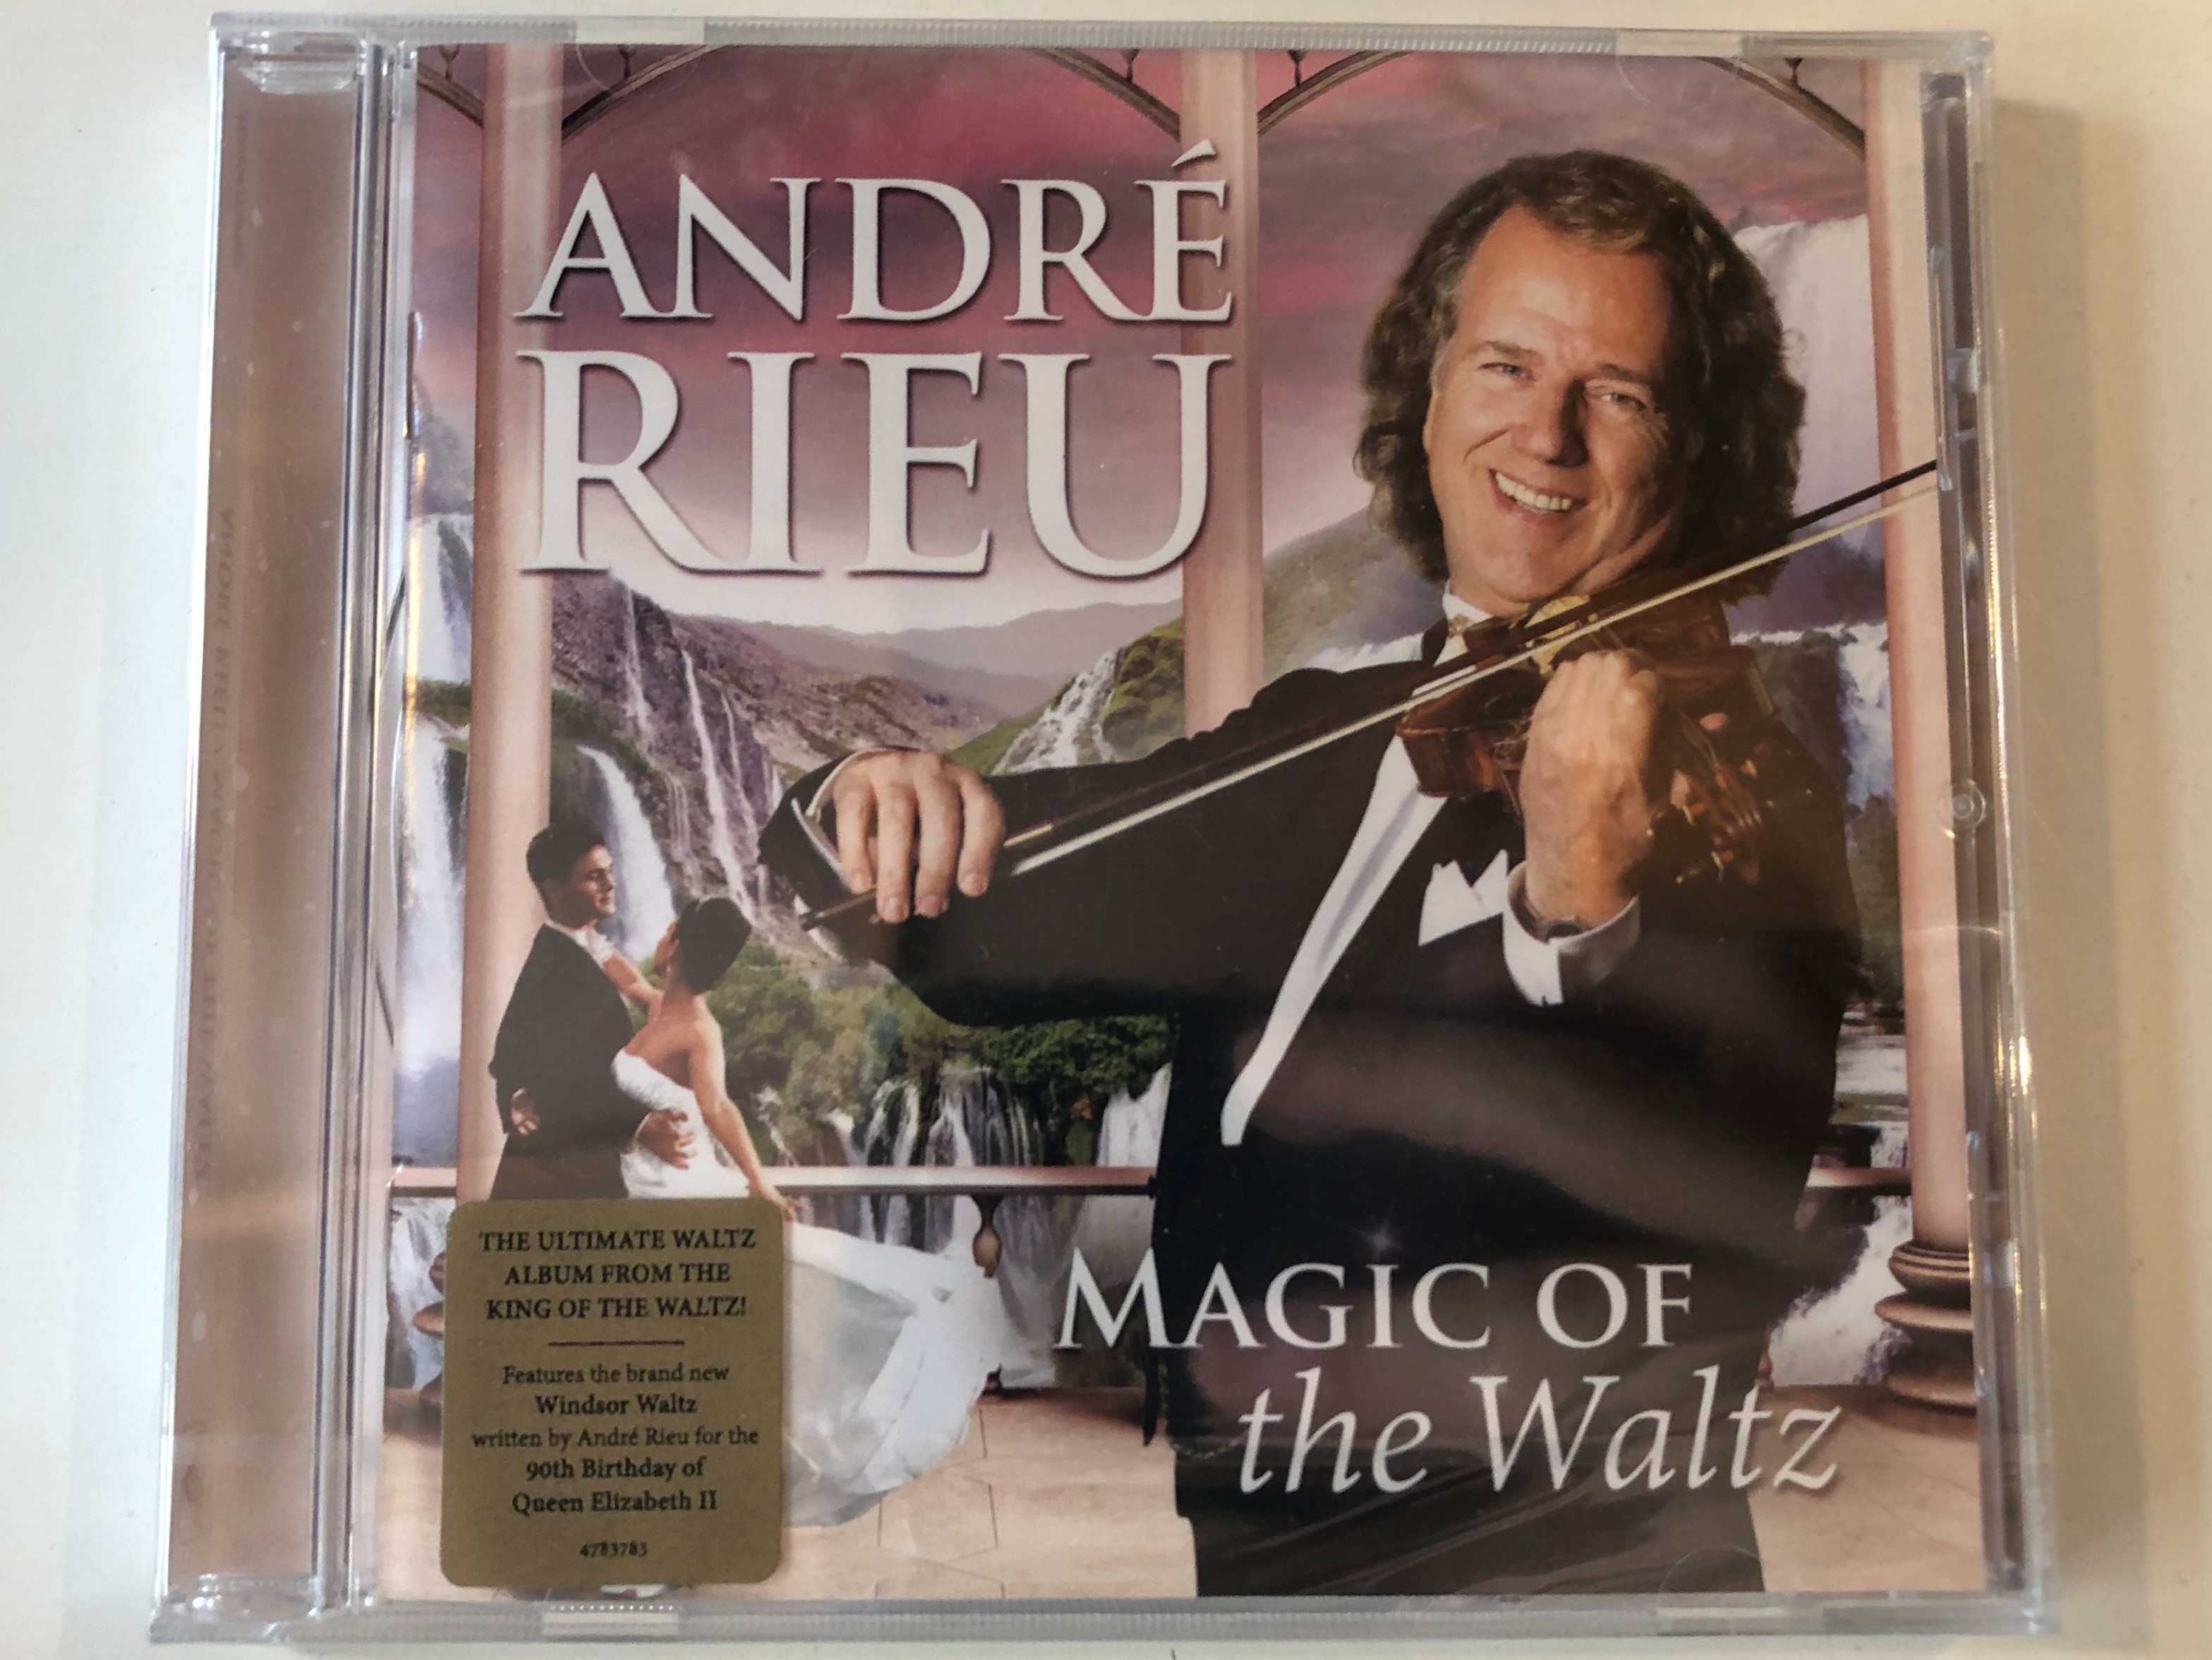 andr-rieu-magic-of-the-walz-the-ultimate-waltz-album-from-the-king-of-the-waltz-features-the-brand-new-windsor-waltz-written-by-andr-rieu-for-the-90th-birthday-of-queen-elizabeth-ii-poly-1-.jpg